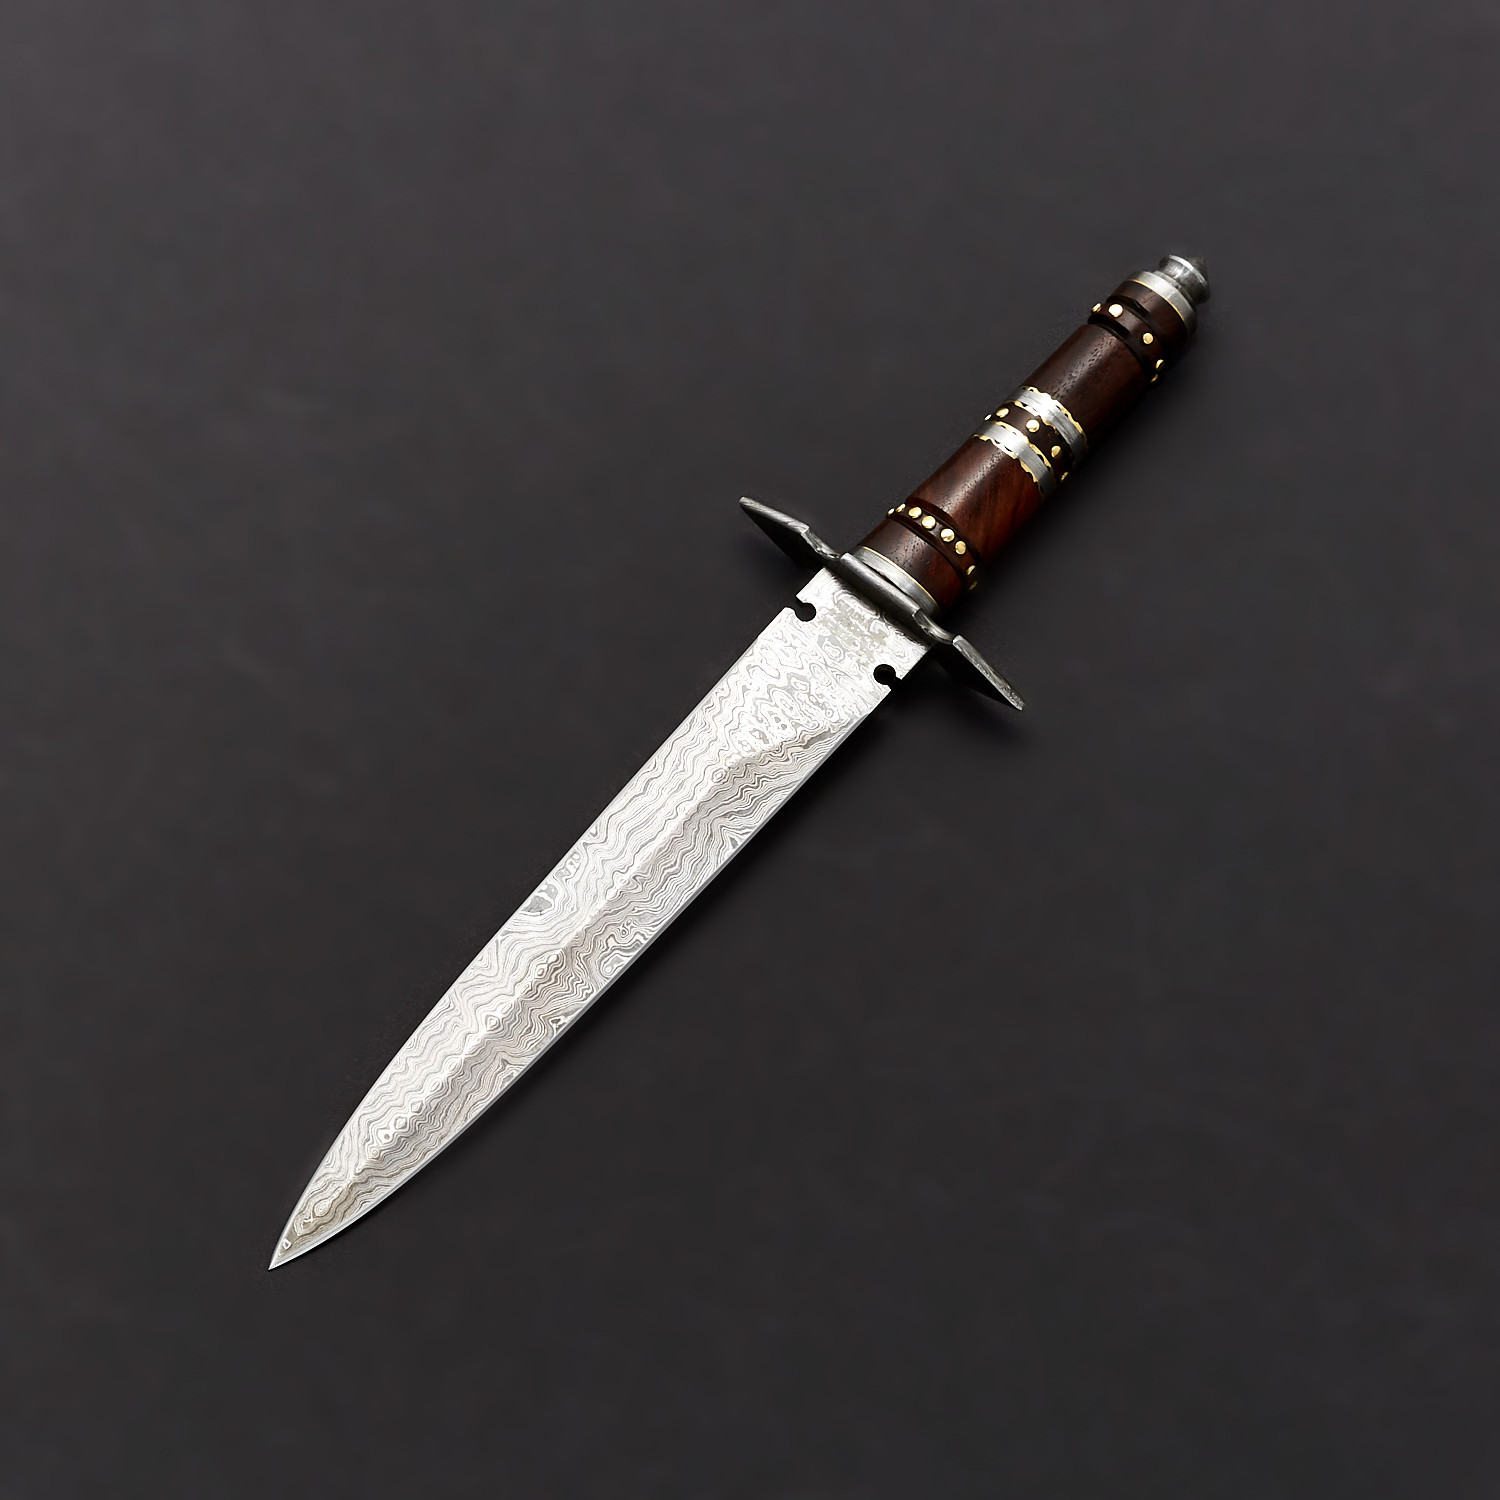 Damascus Fancy Dagger Black Forge Knives Touch Of Modern